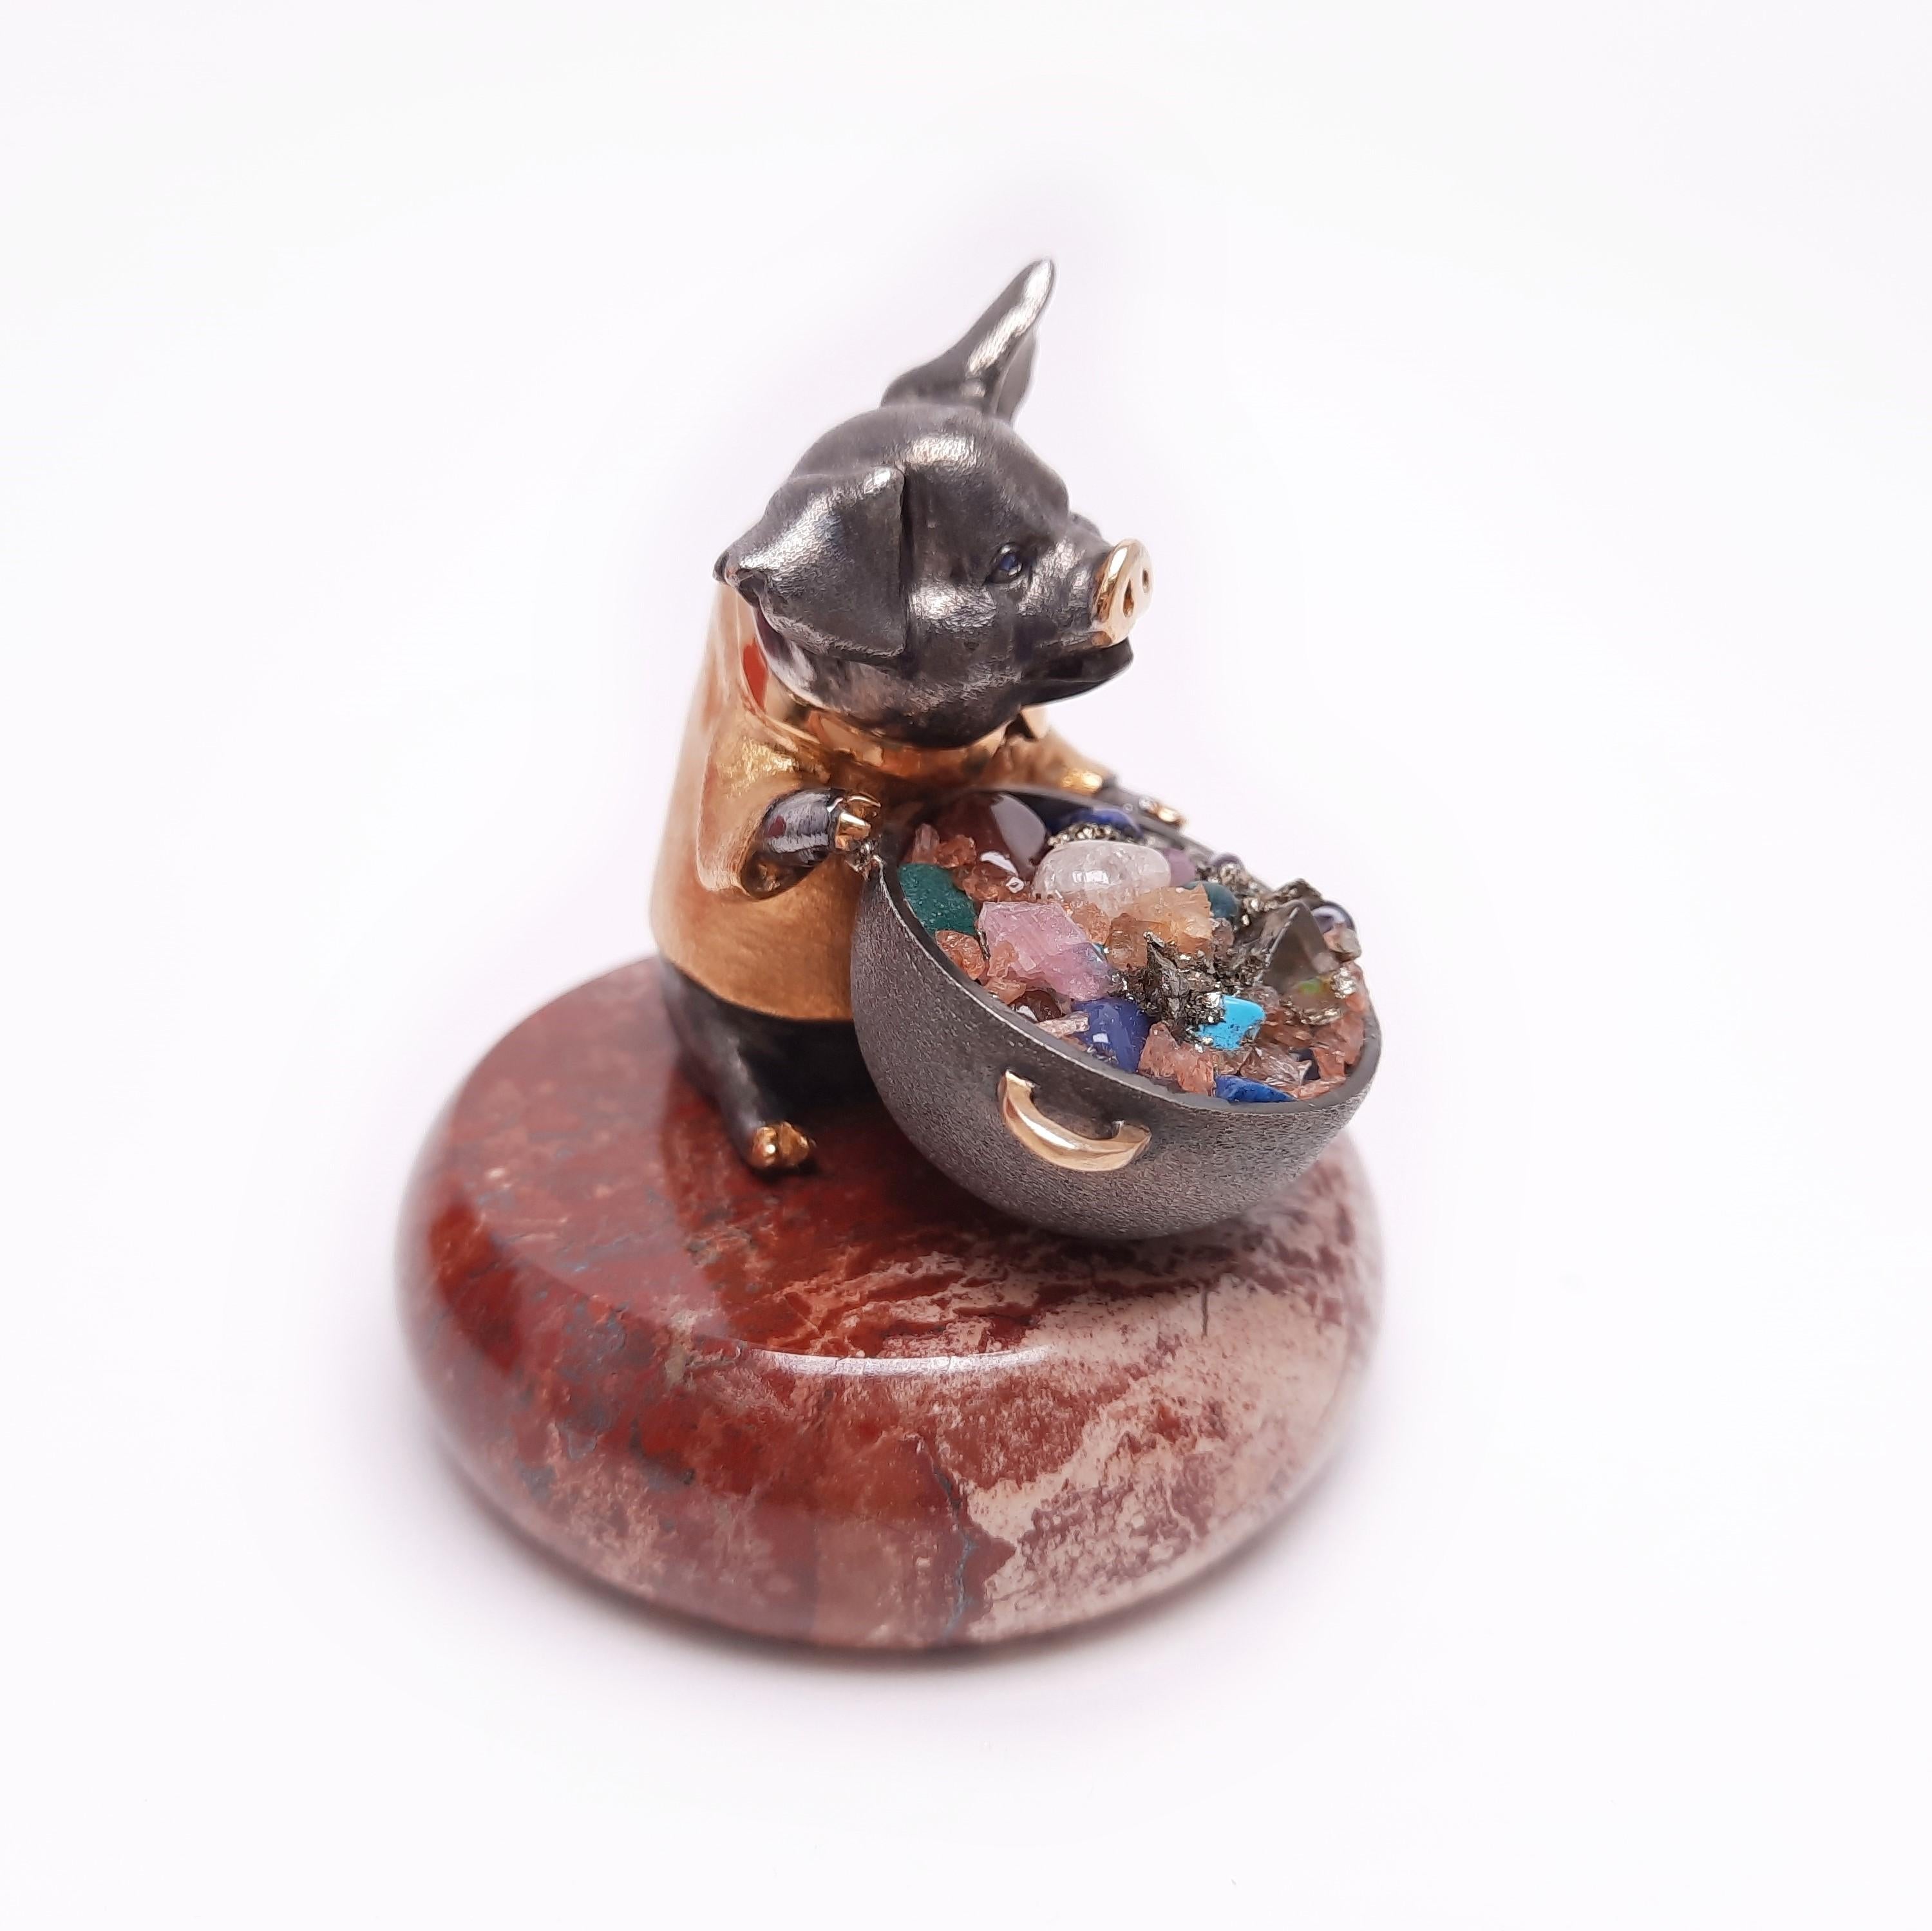 A pig, a symbol of fertility and abundance, was made into a silver miniature with a creative idea and masterful craftsmanship. A genuine silver pig has lively facial features with sapphire eyes and cooks a hotpot for family and friends. Inside the